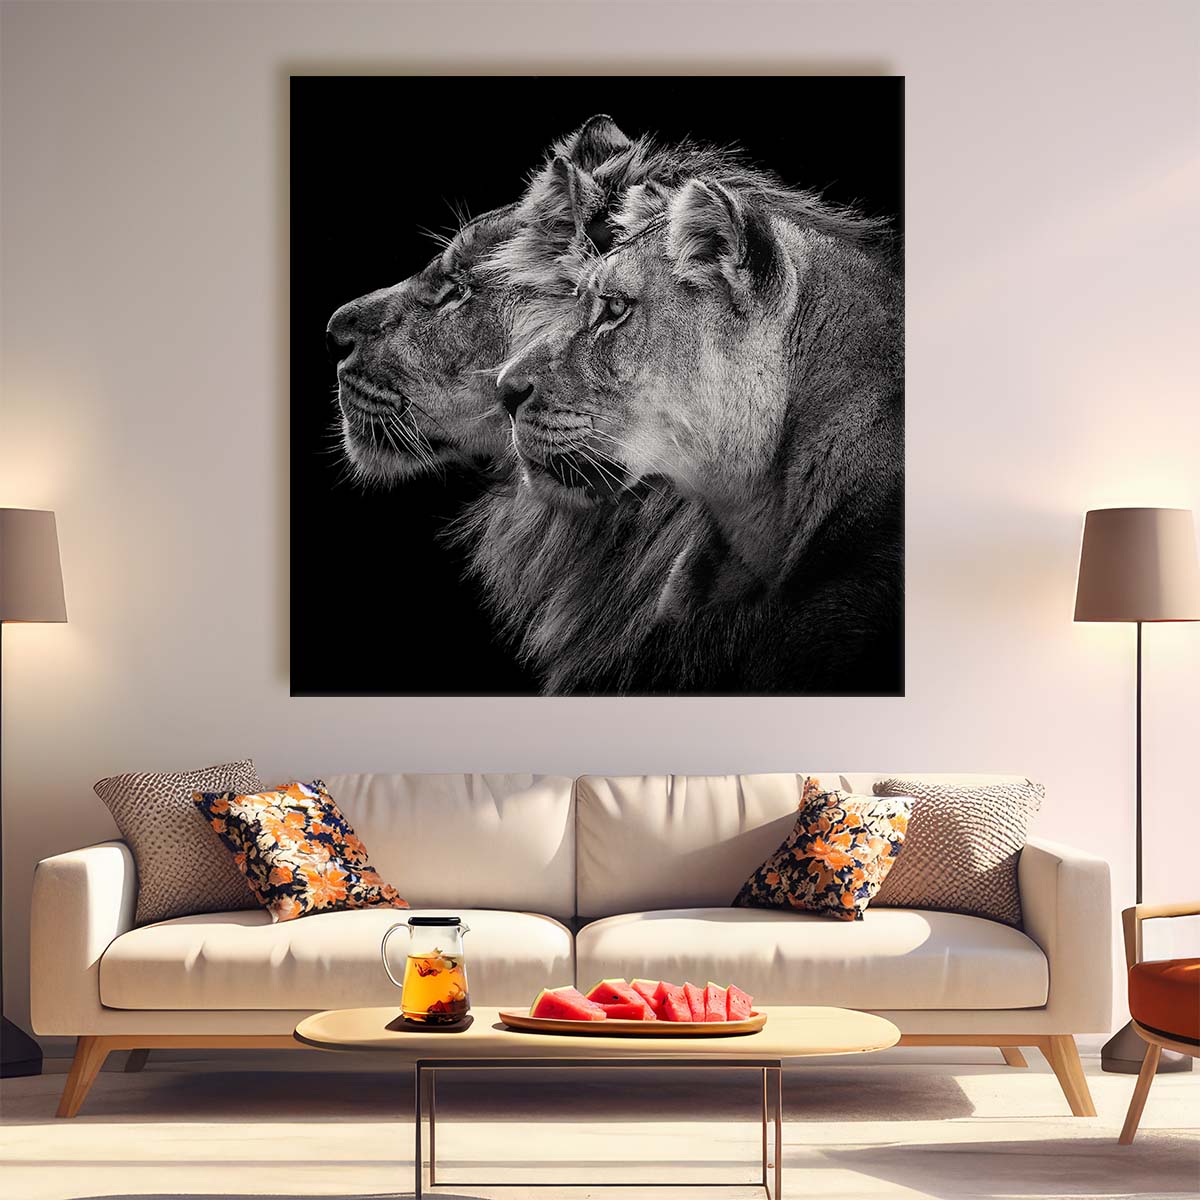 Fierce Love in the Savanna Monochrome Lion Couple Photography Wall Art by Luxuriance Designs. Made in USA.